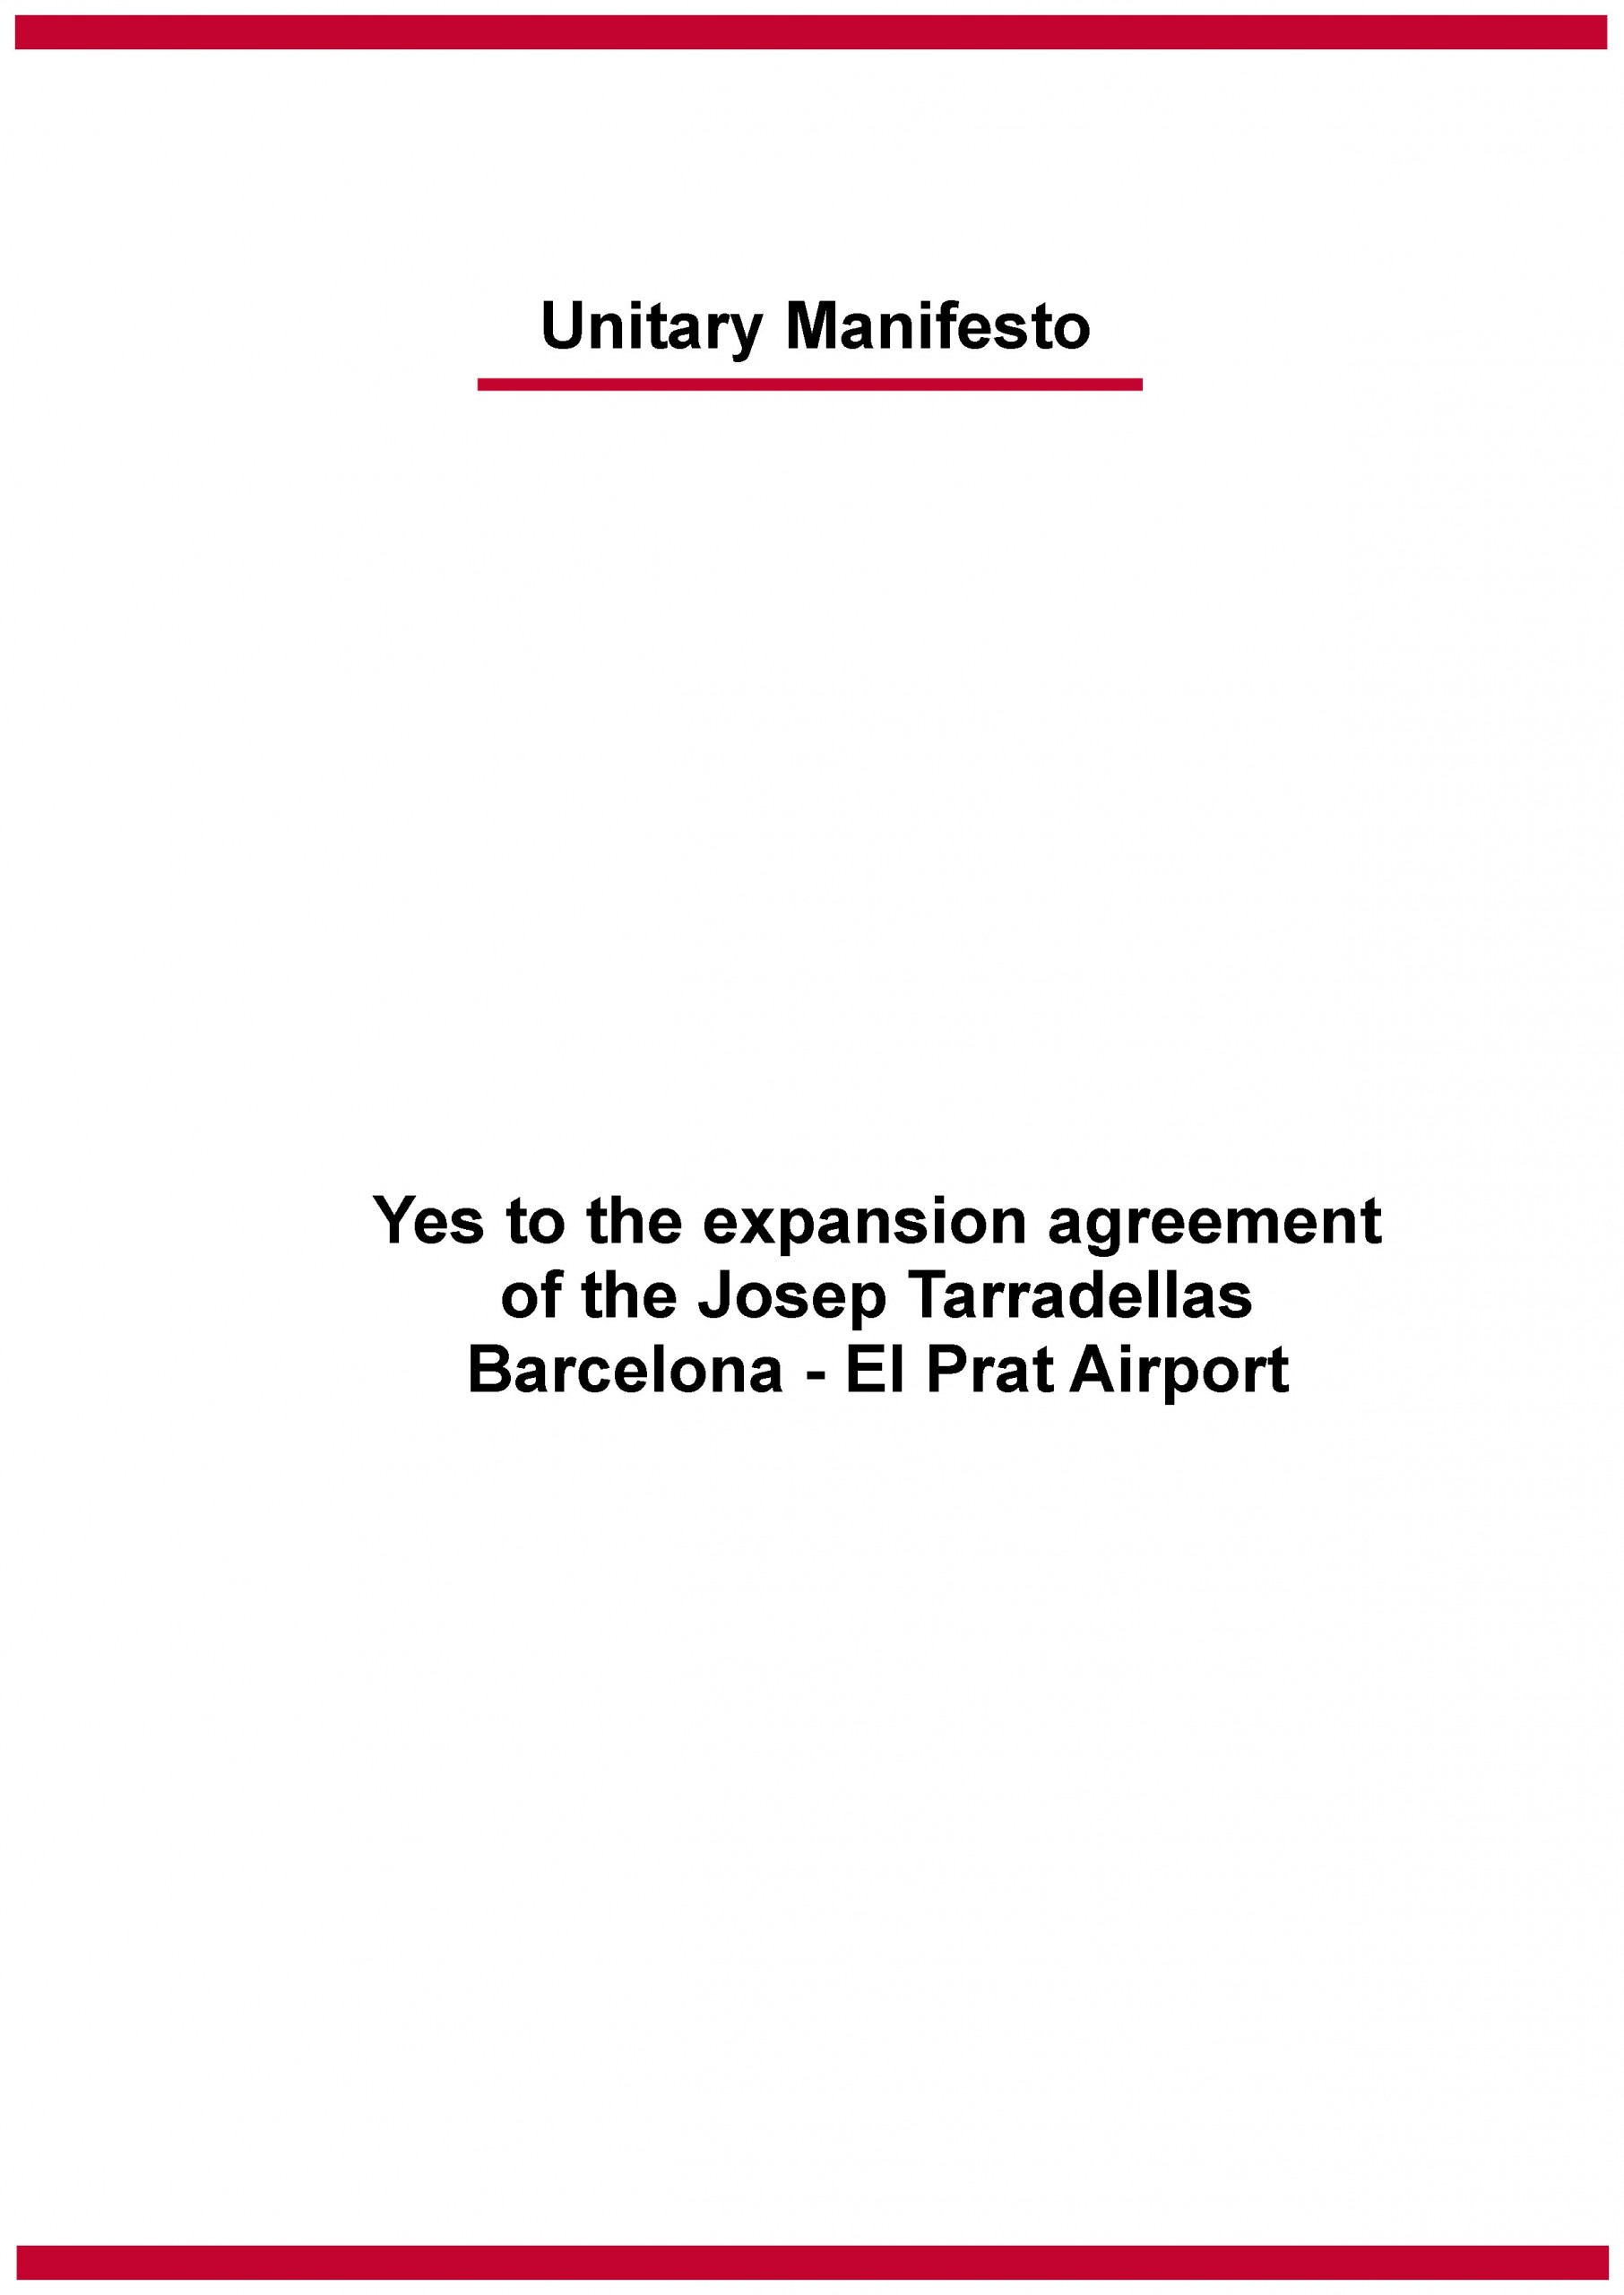 Manifesto “Yes to airport’s expansion agreement”